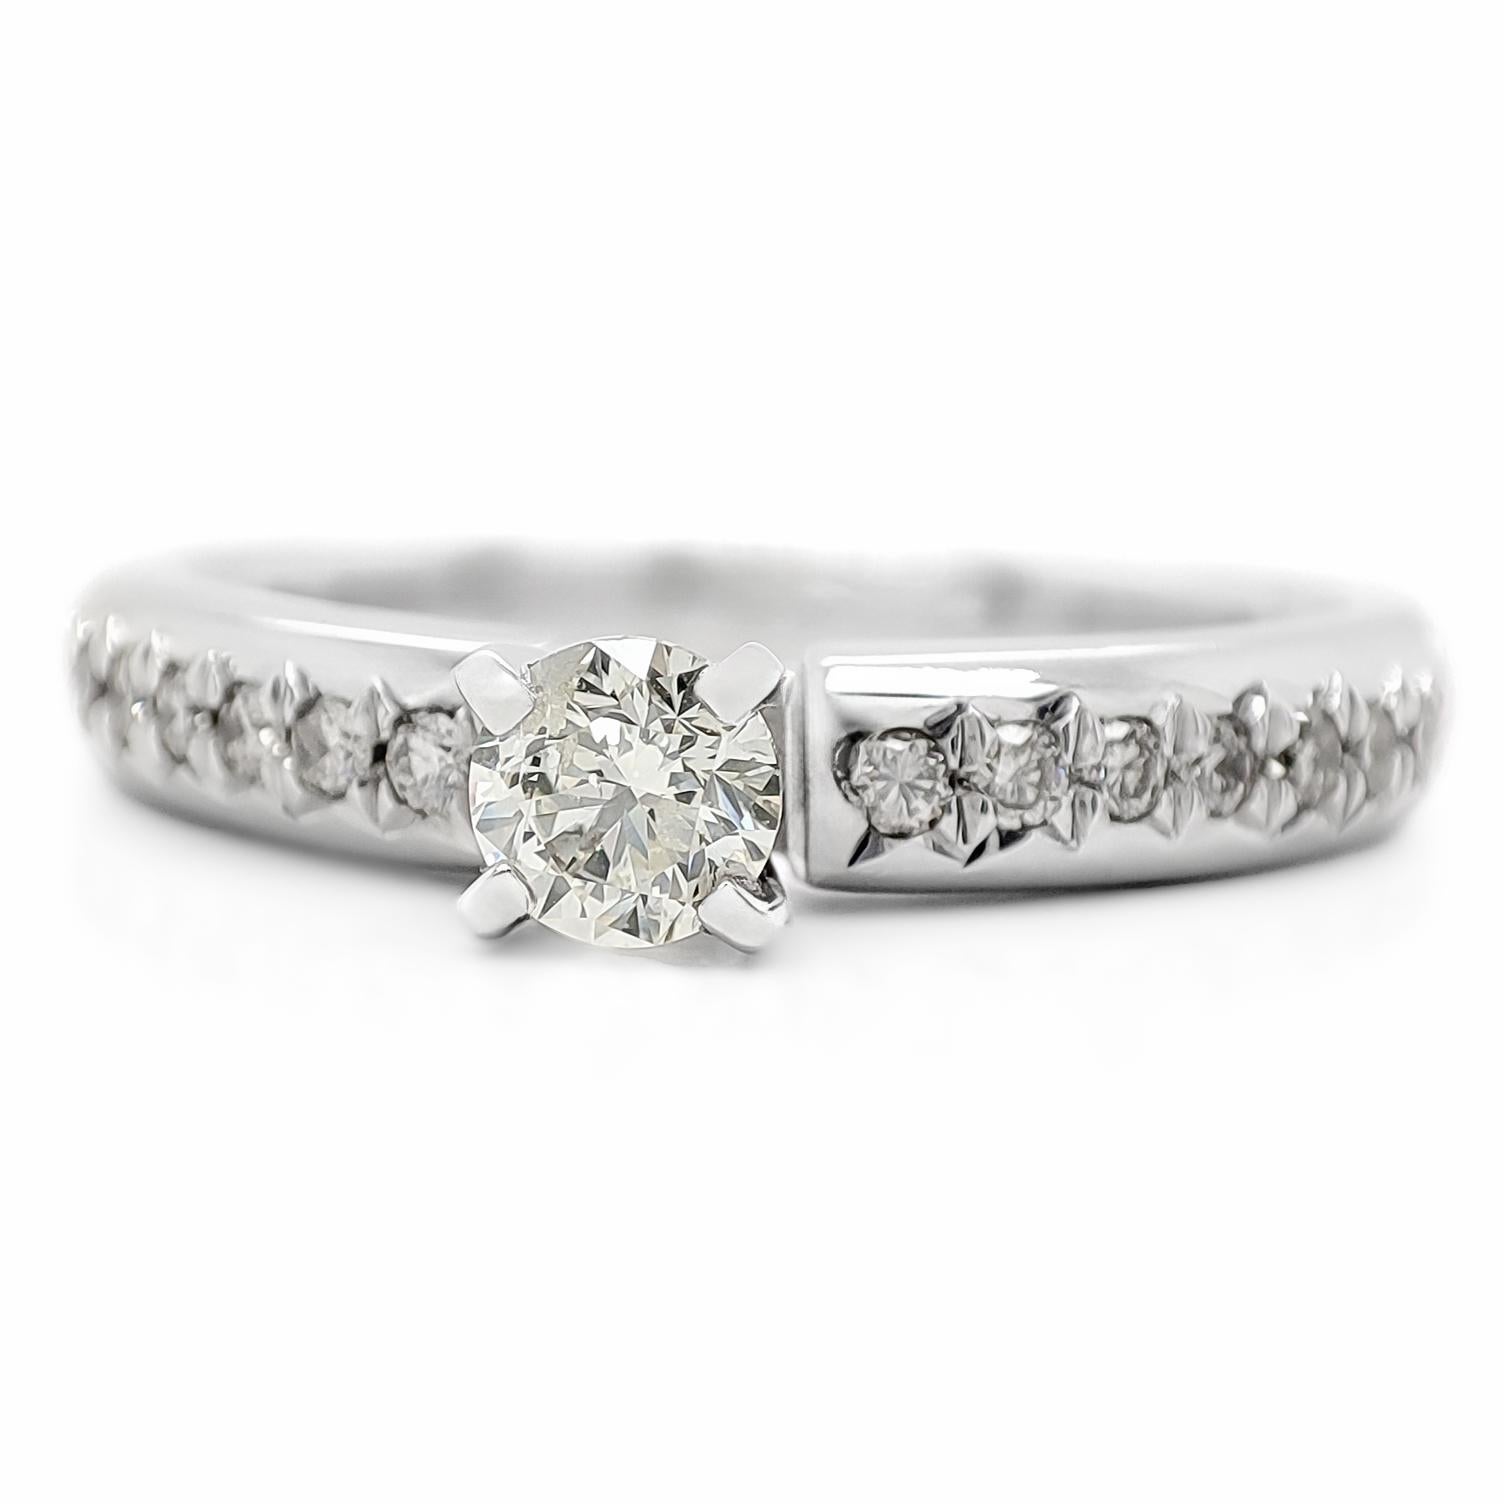 FOR US CUSTOMER NO VAT!

 The central diamond in this elegant ring weighs 0.26 carats and has a light yellow color making it a unique and charming choice.

Adding to its allure, the ring is adorned with 14 smaller round diamond stones, totaling 0.15